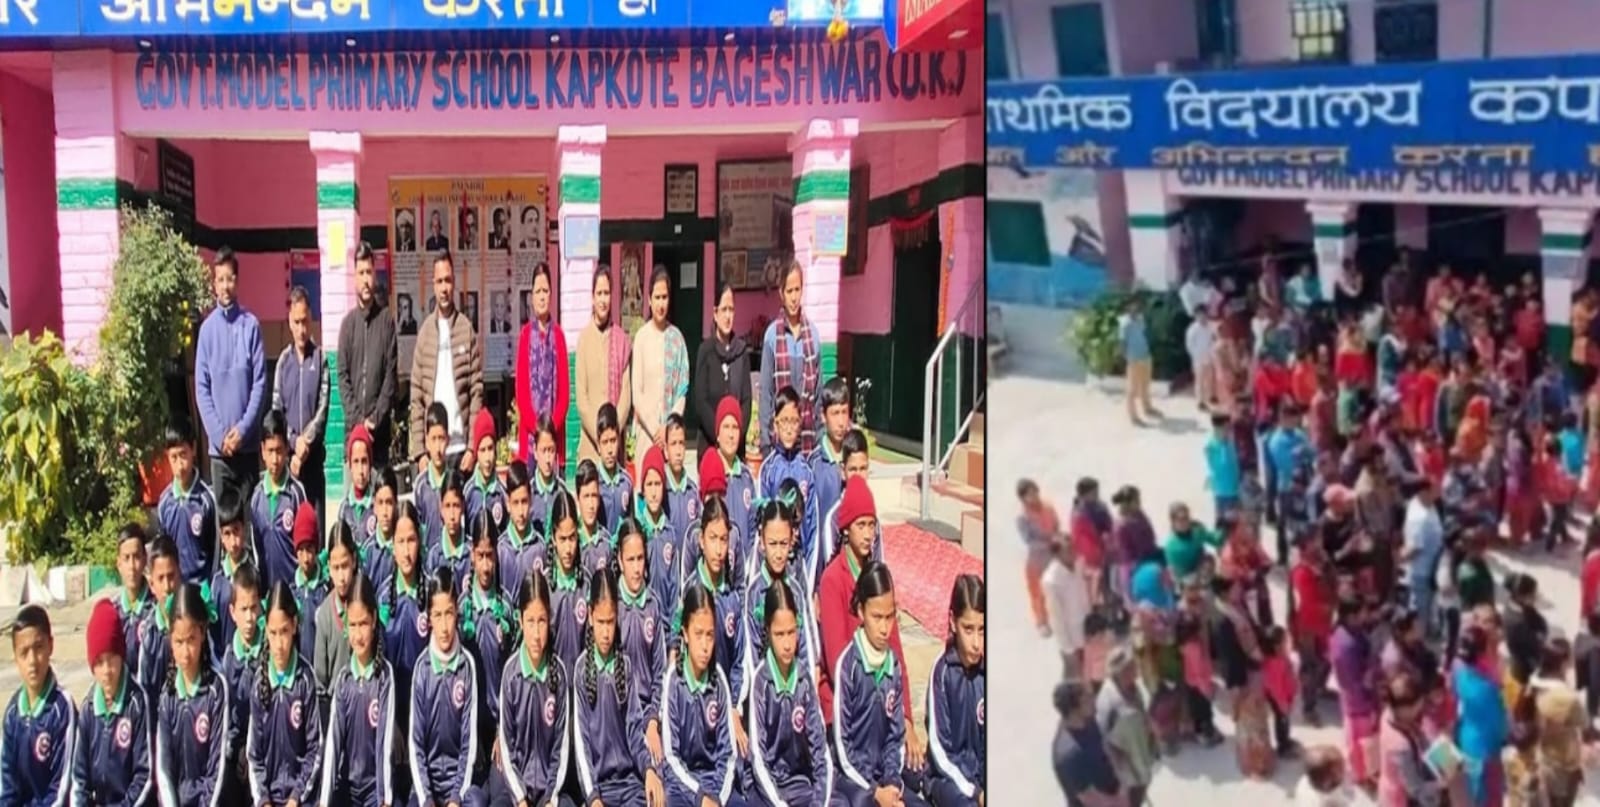 This government school of Uttarakhand became an example, 40 children were successful in Sainik School entrance examination.